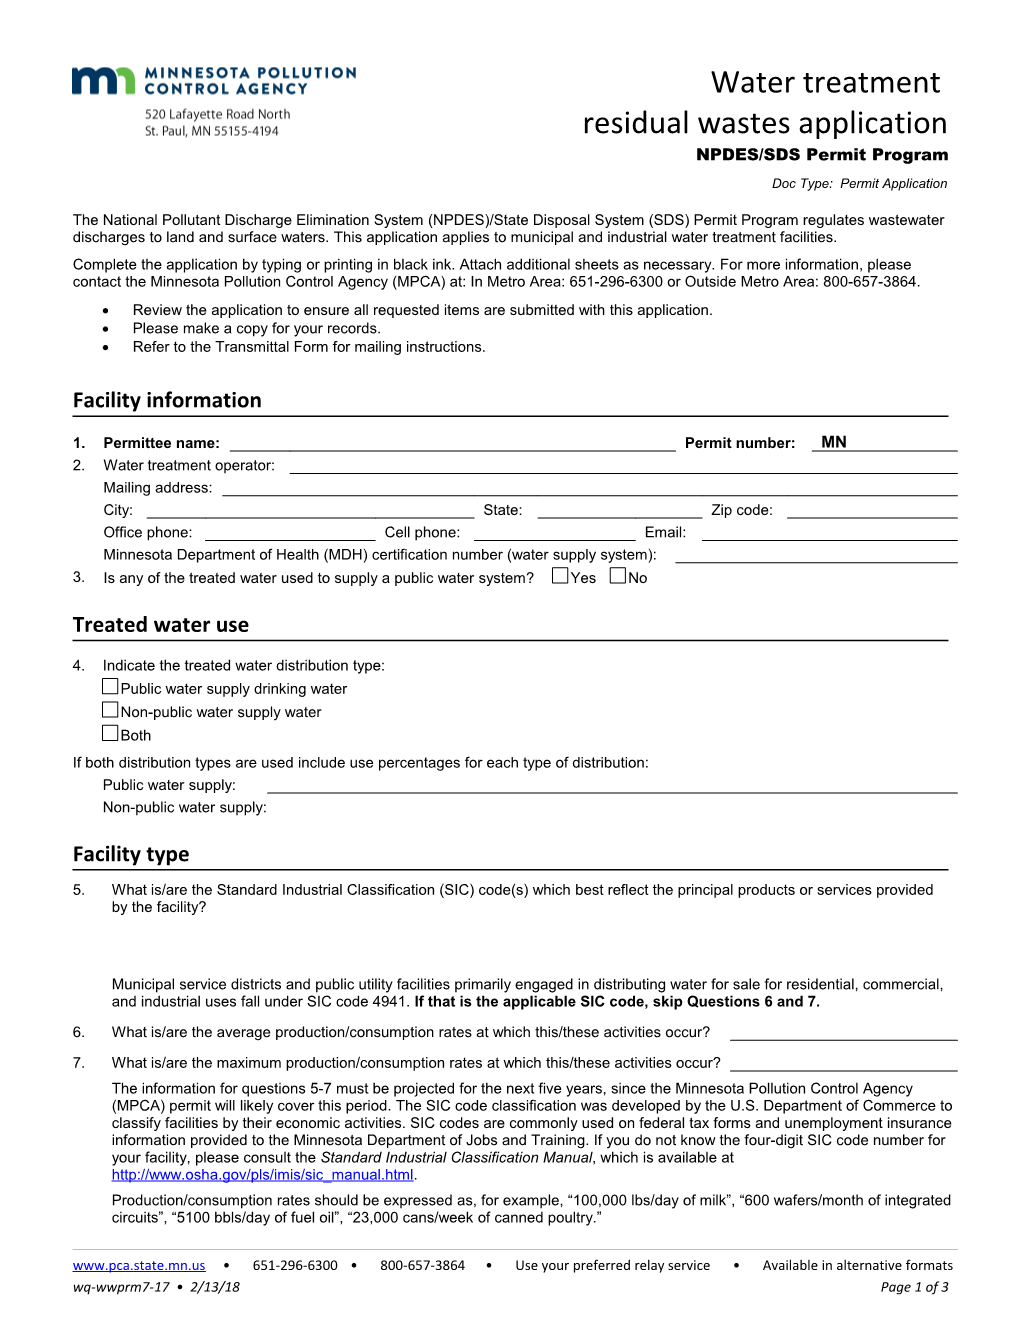 Water Treatment Residual Wastes Application Form